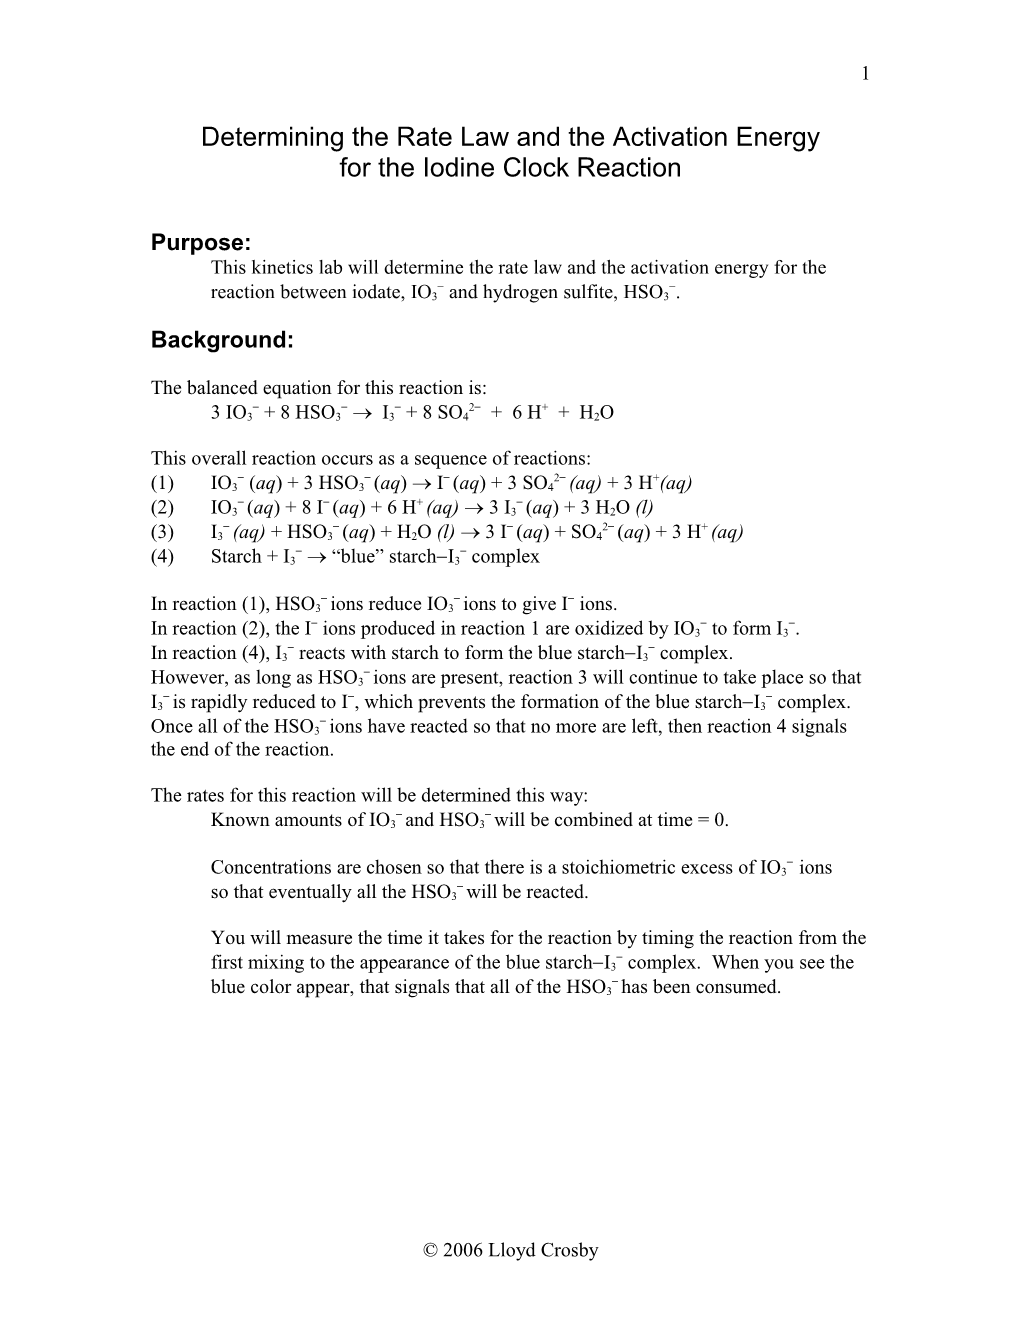 Determining the Rate Law and the Activation Energy for the Iodine Clock Reaction